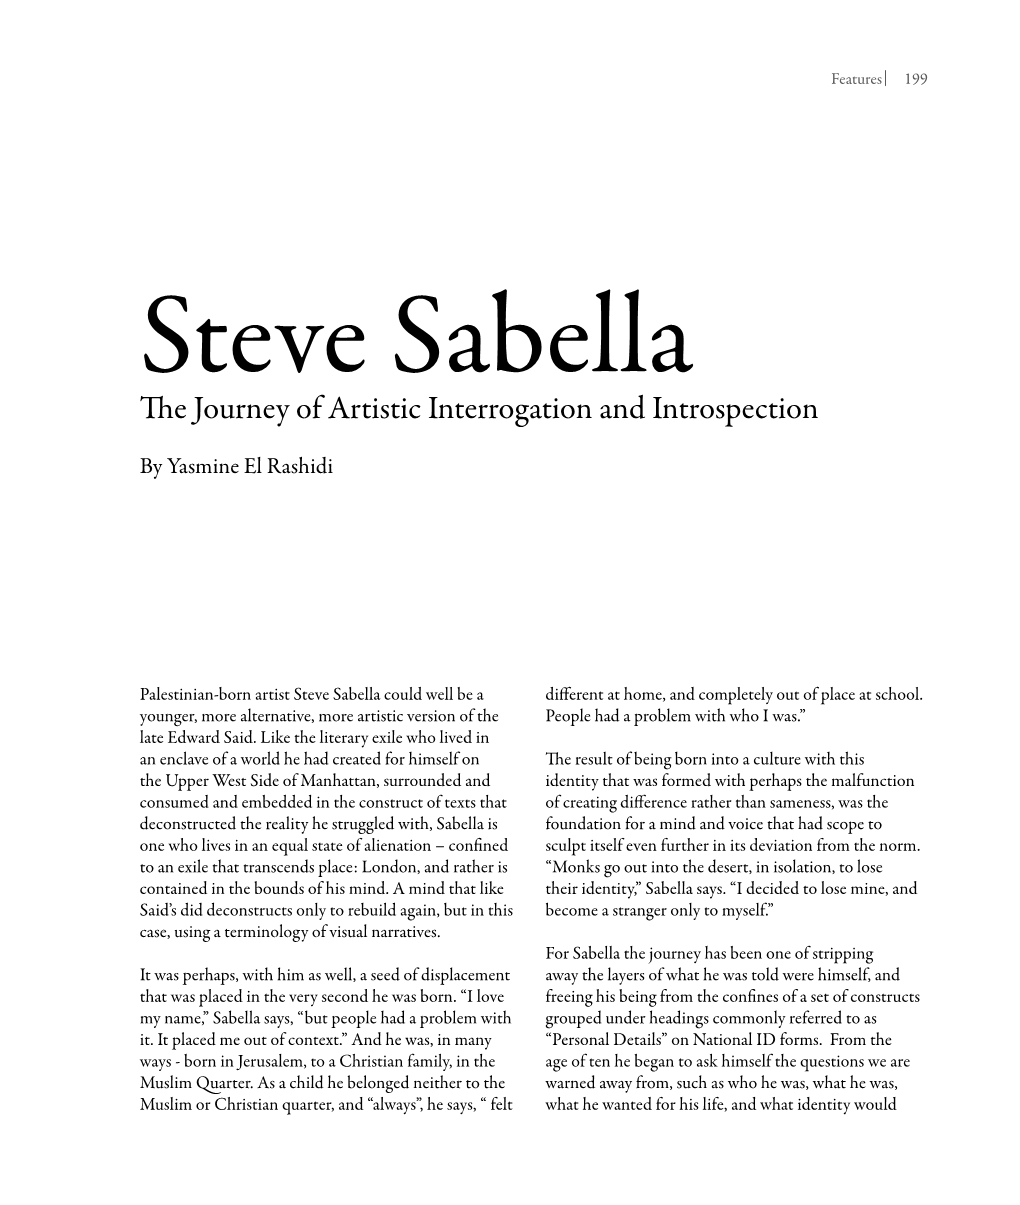 The Journey of Artistic Interrogation and Introspection